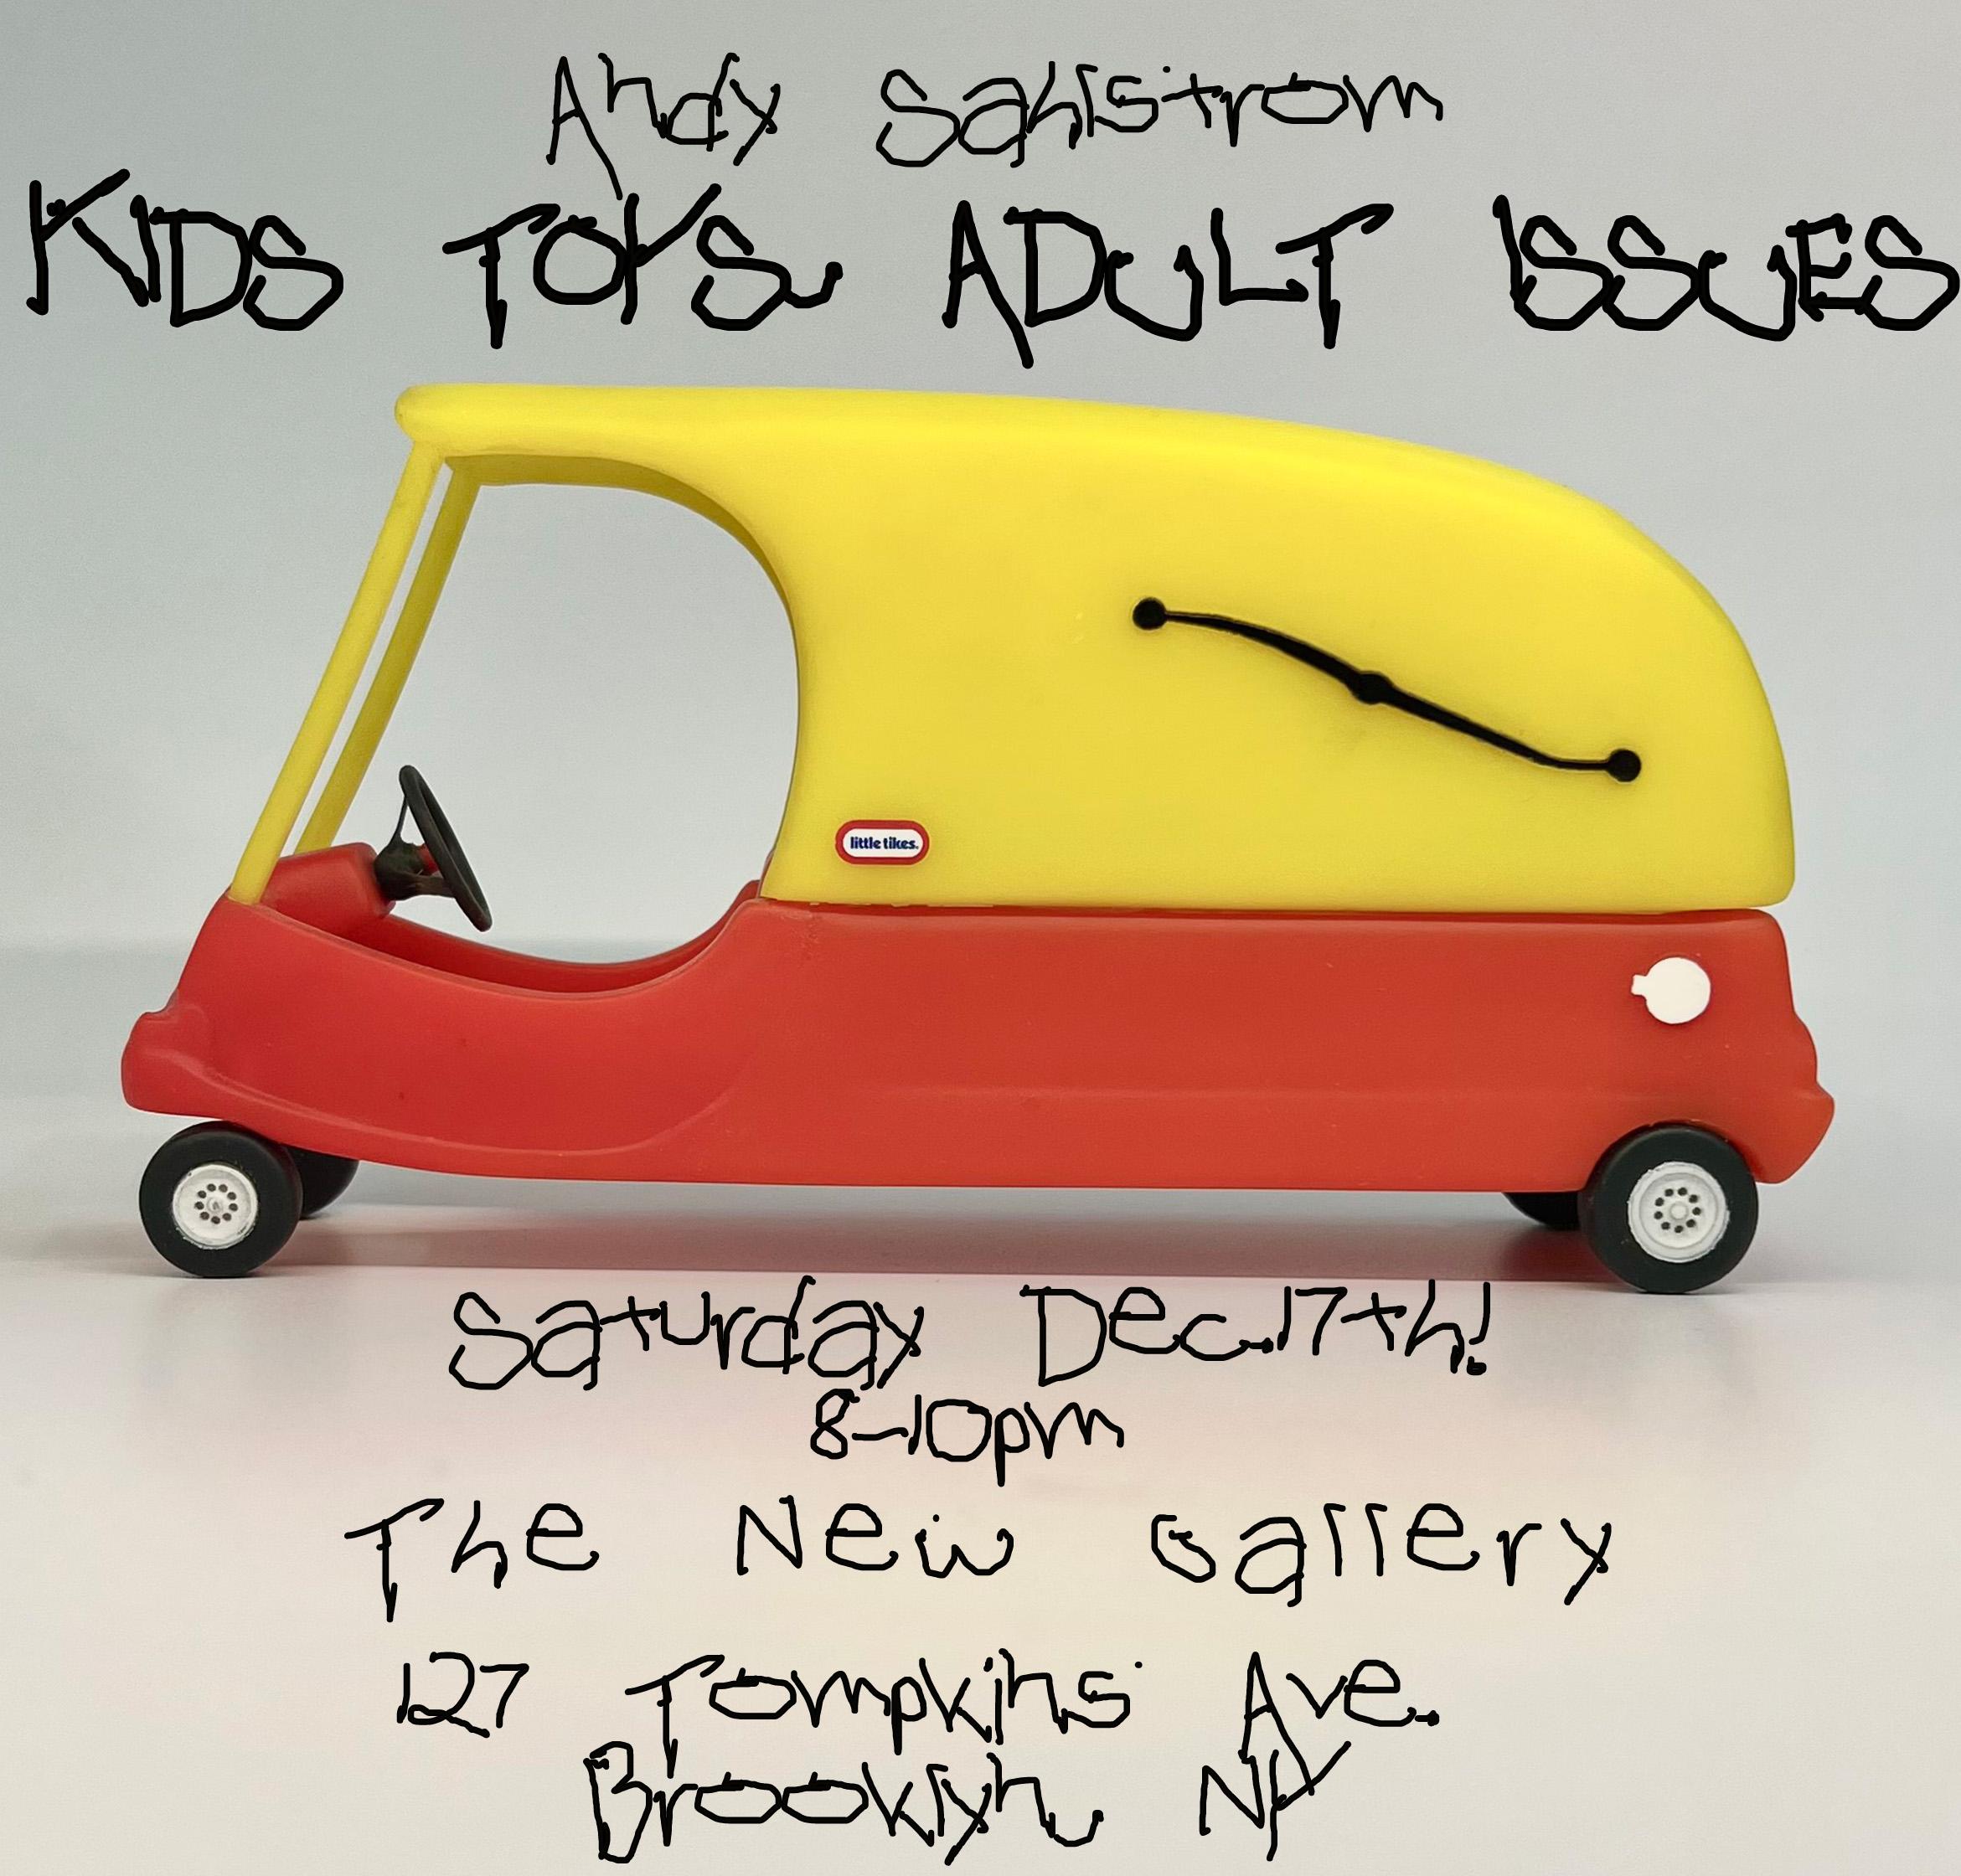 Advertisement for Andy's art show, Dec 16th, 2022, 8-10pm, The New Gallery, 127 Tompkins Ave, Brooklyn